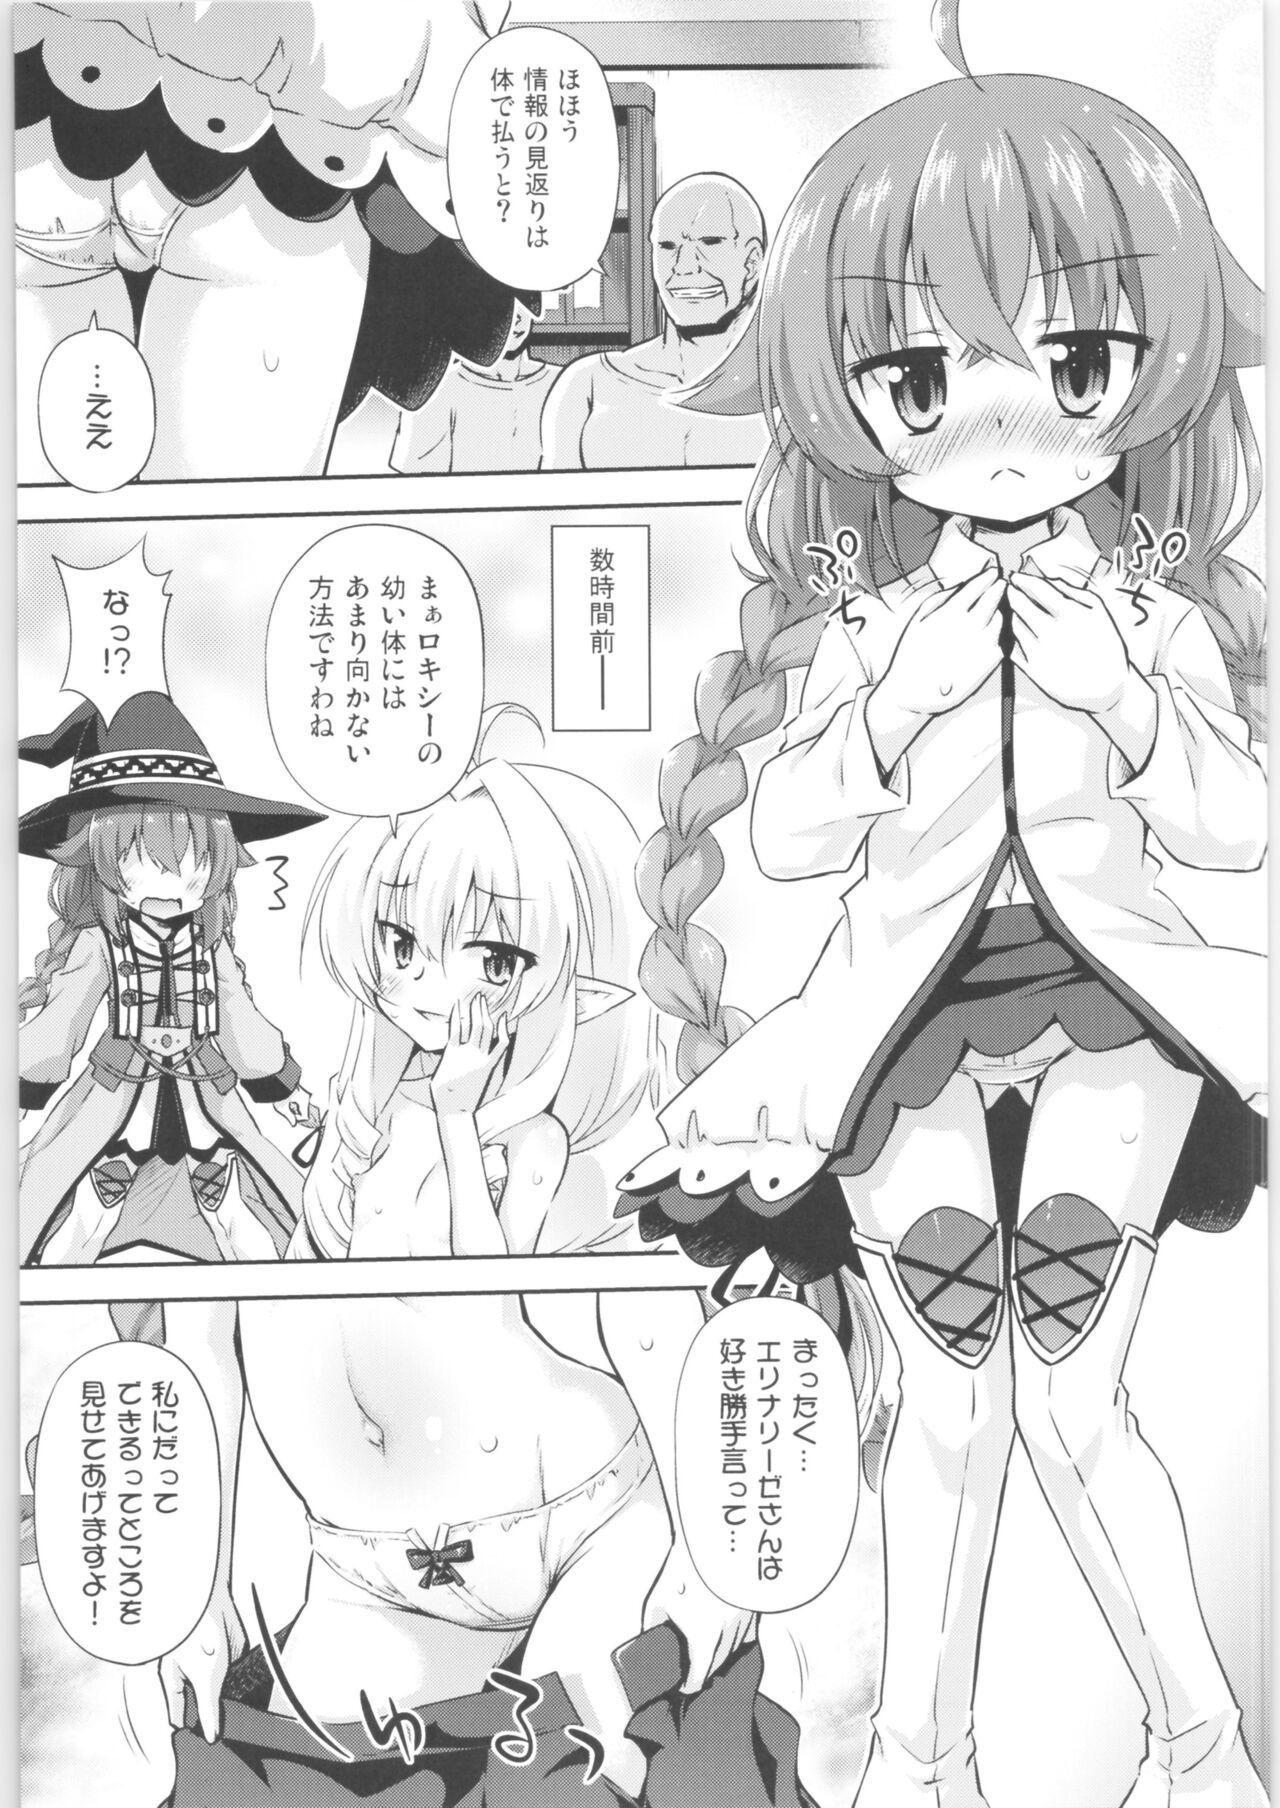 Cumload The Information Fee is My Body! - Mushoku tensei Cunnilingus - Page 3